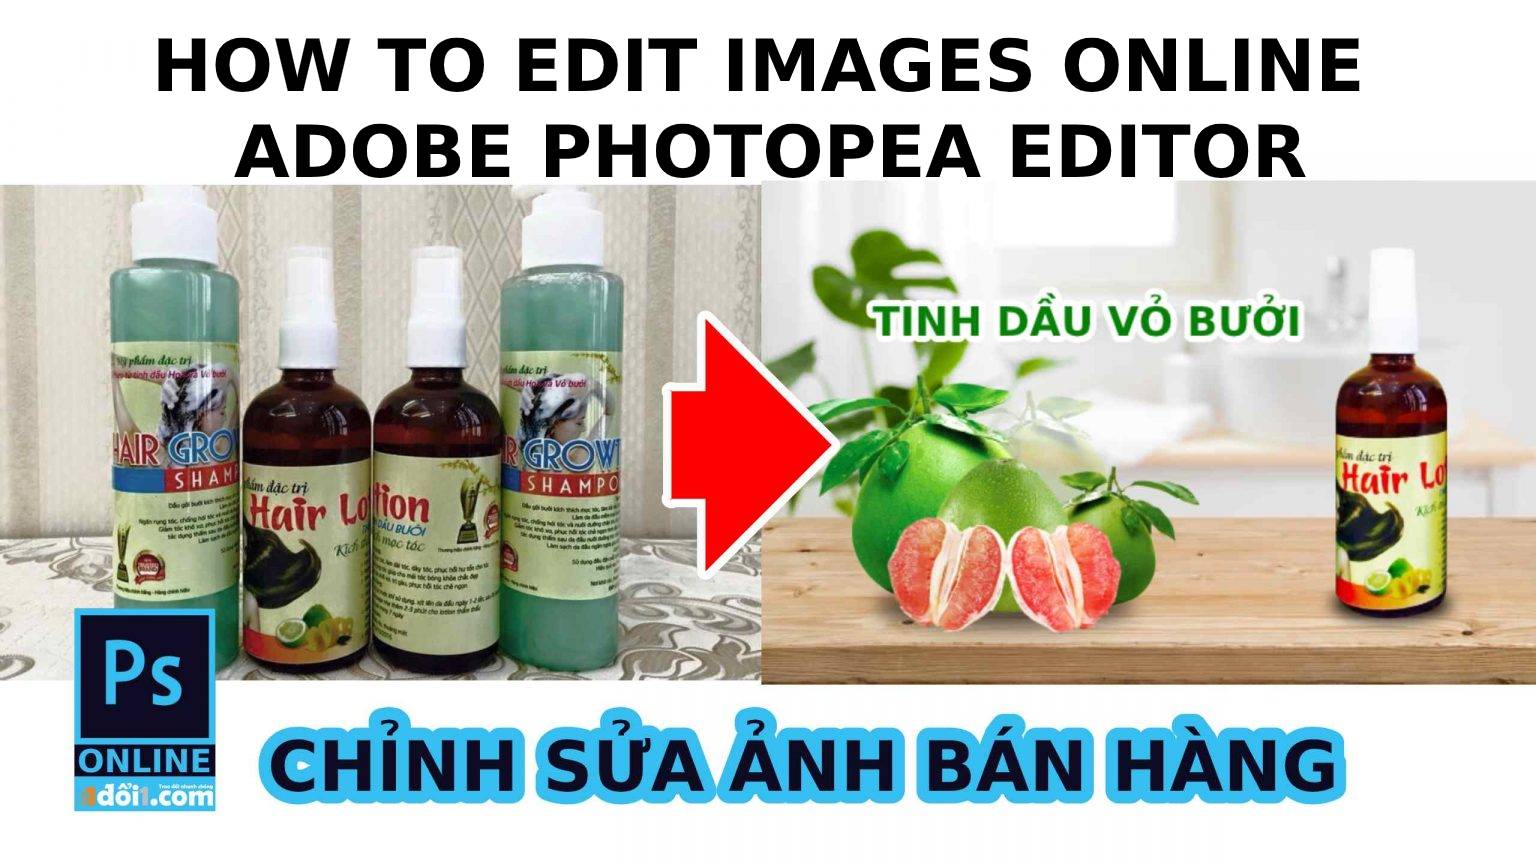 How to edit images online adobe photopea editor